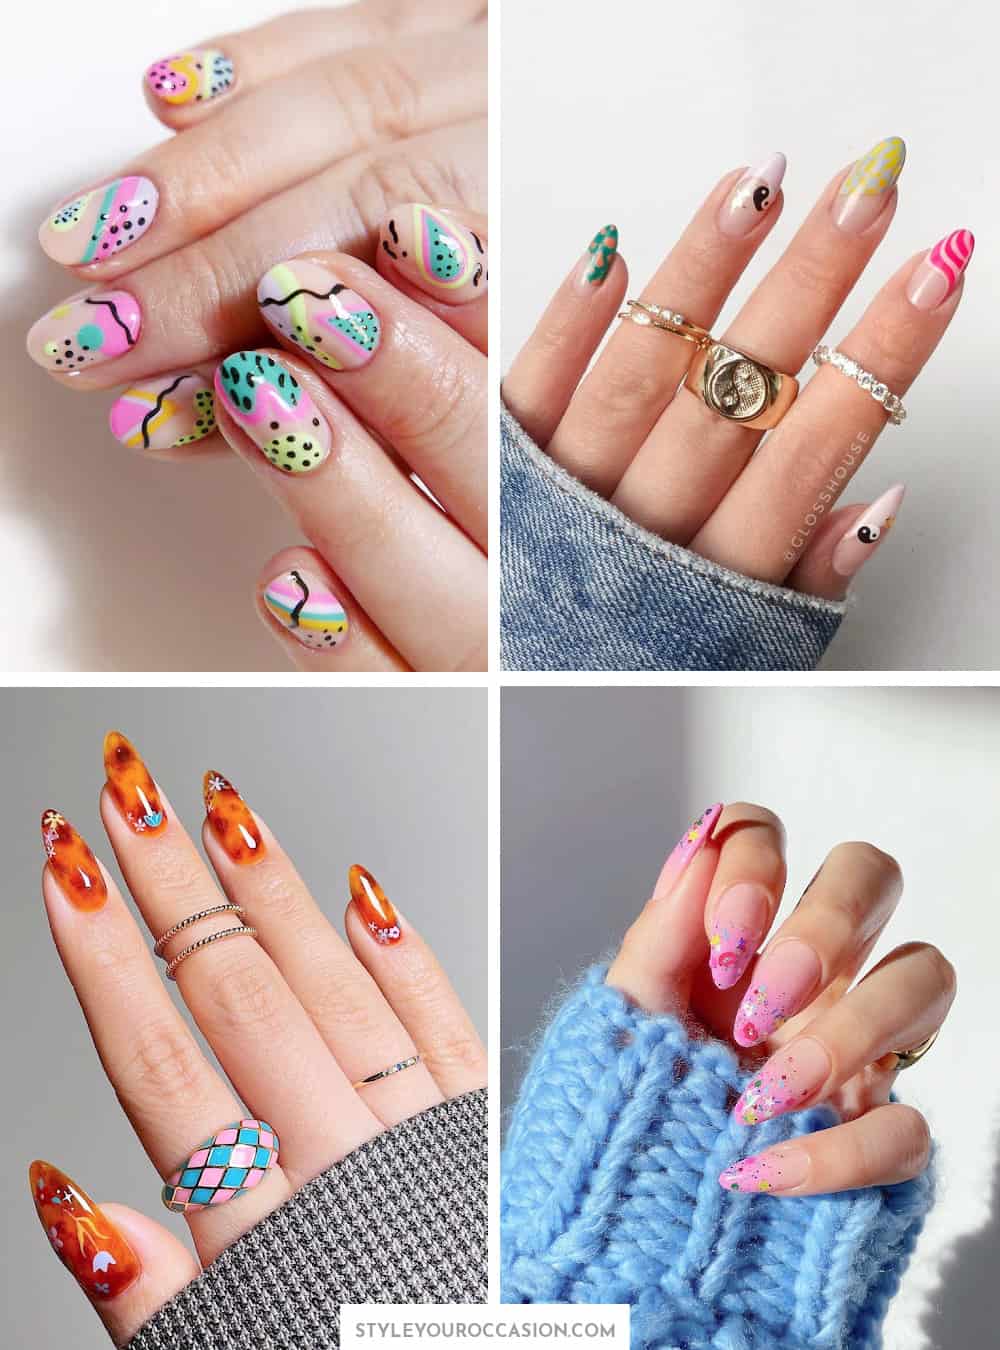 The Nail Art Trend That Will Have 90s Kids Feeling Oh-So Nostalgic